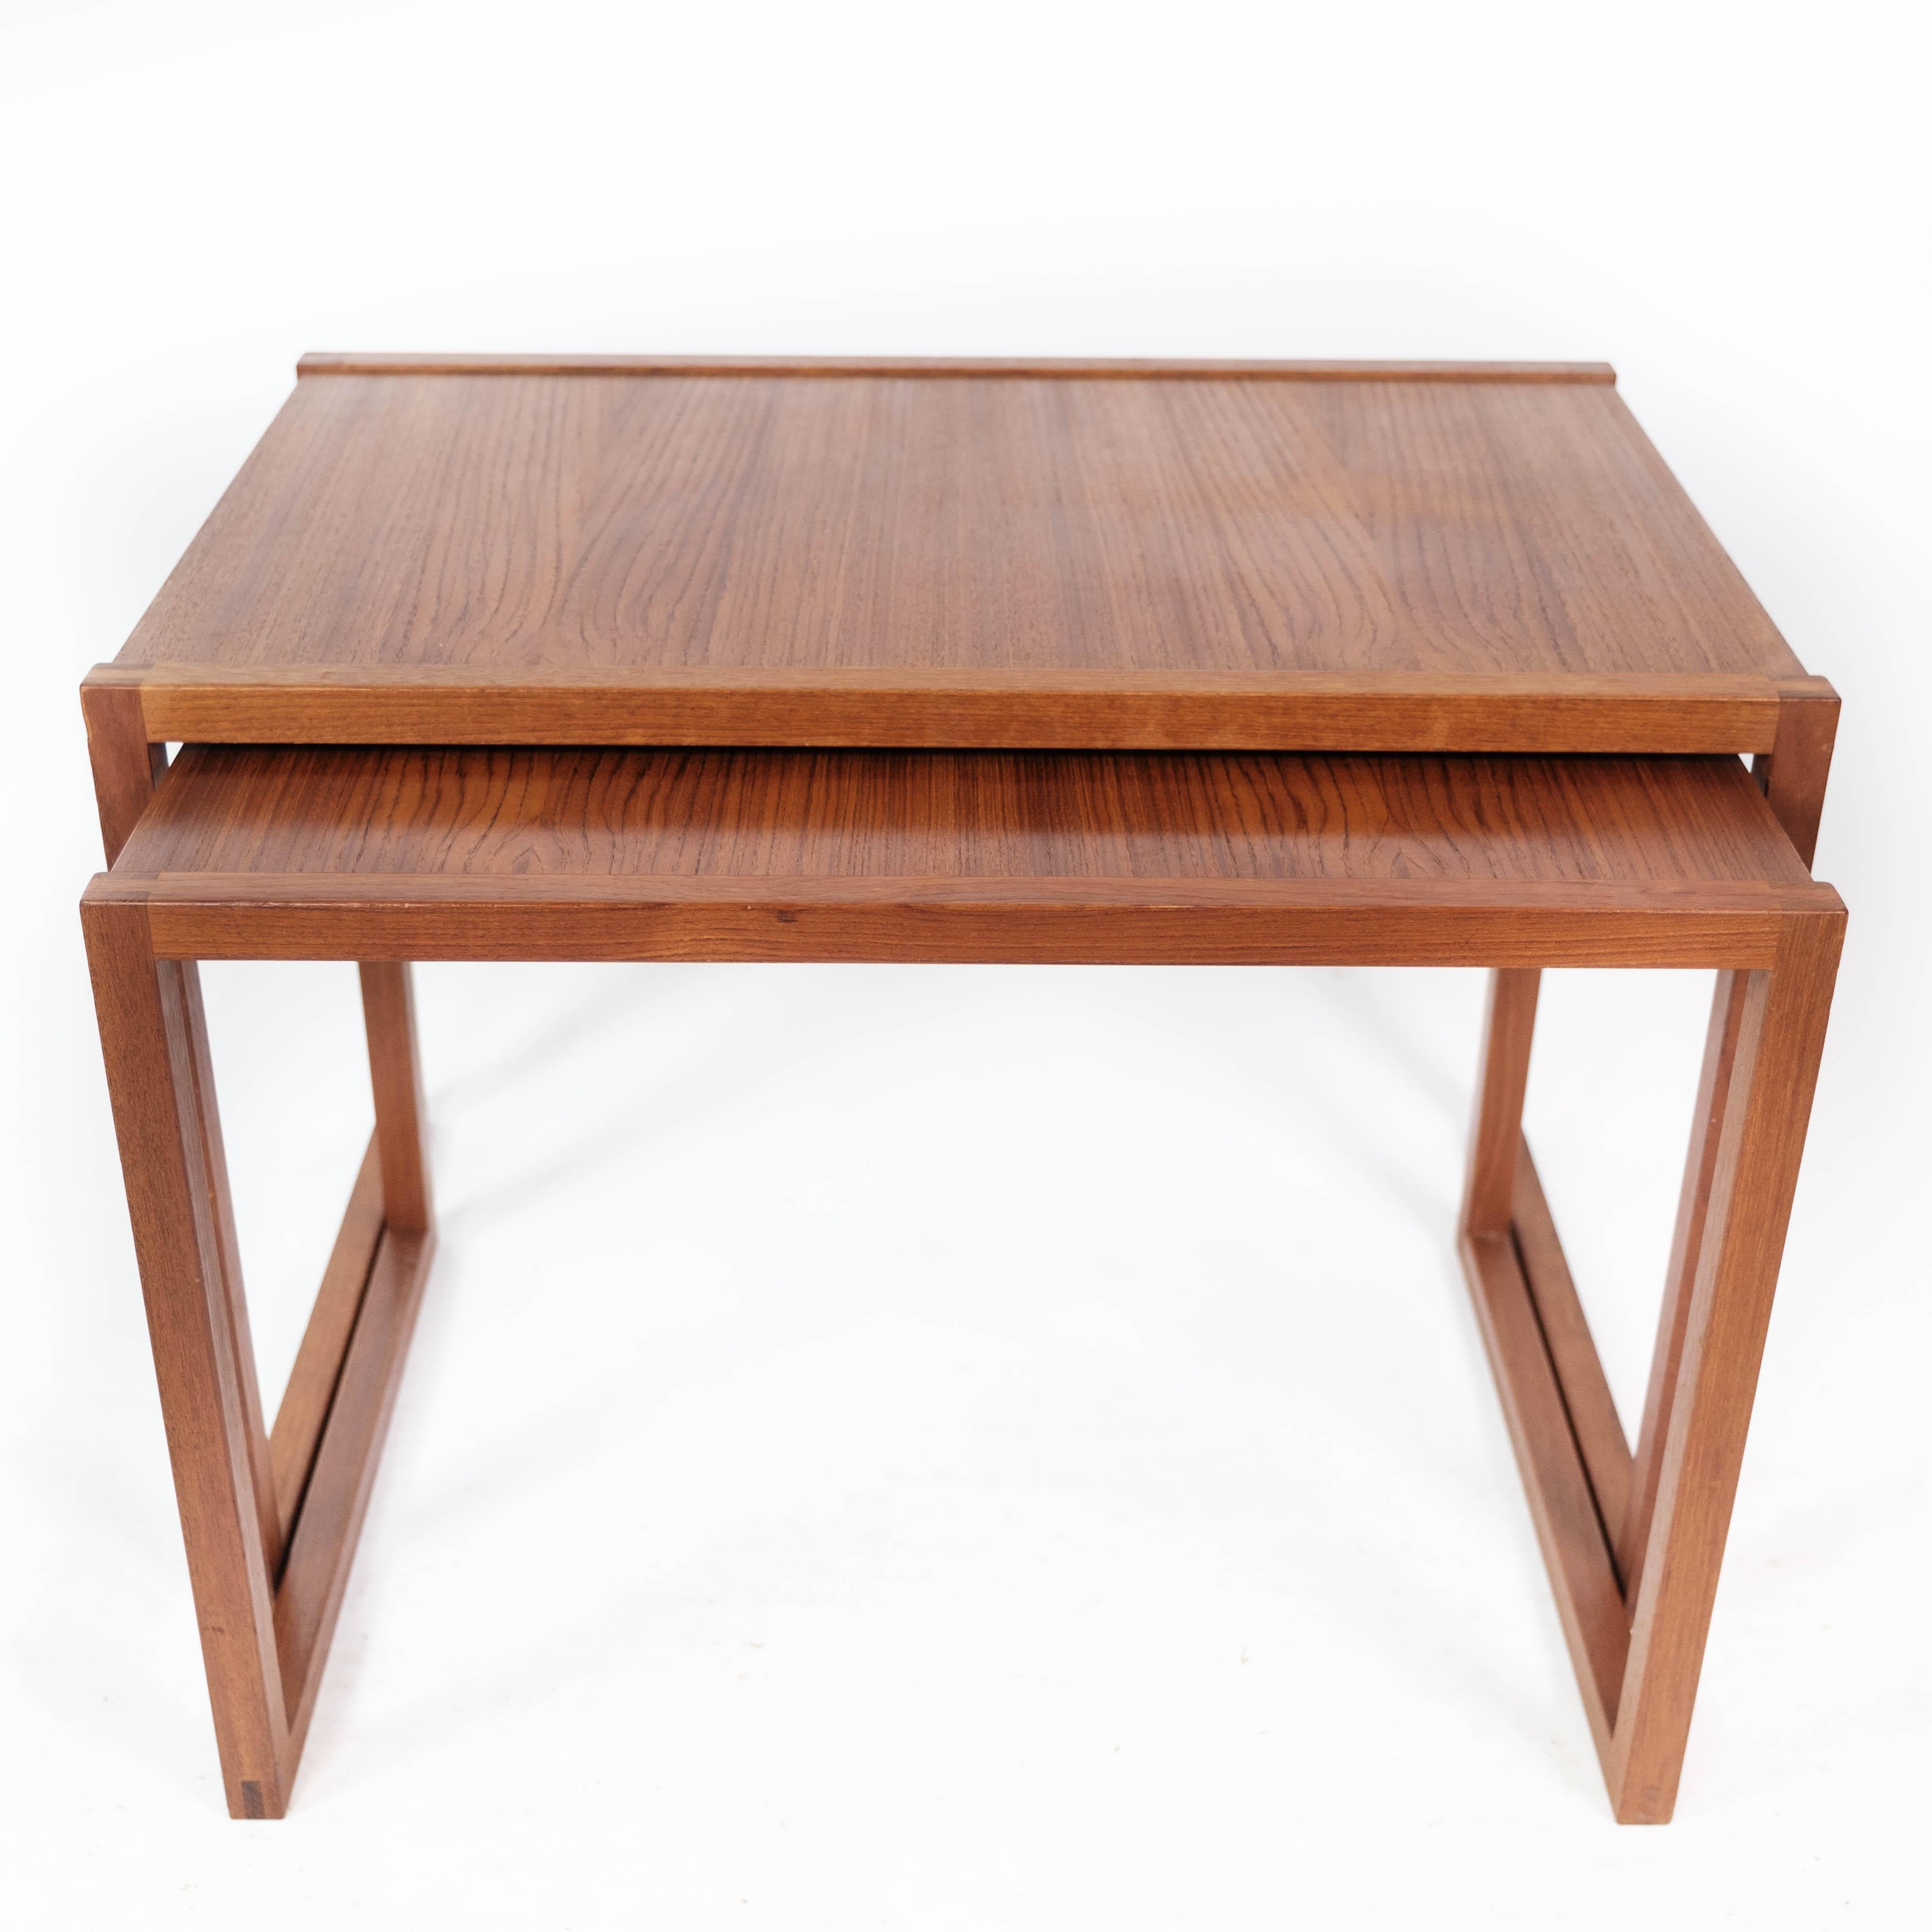 Nesting Table in Teak of Danish Design from the 1960s For Sale 2